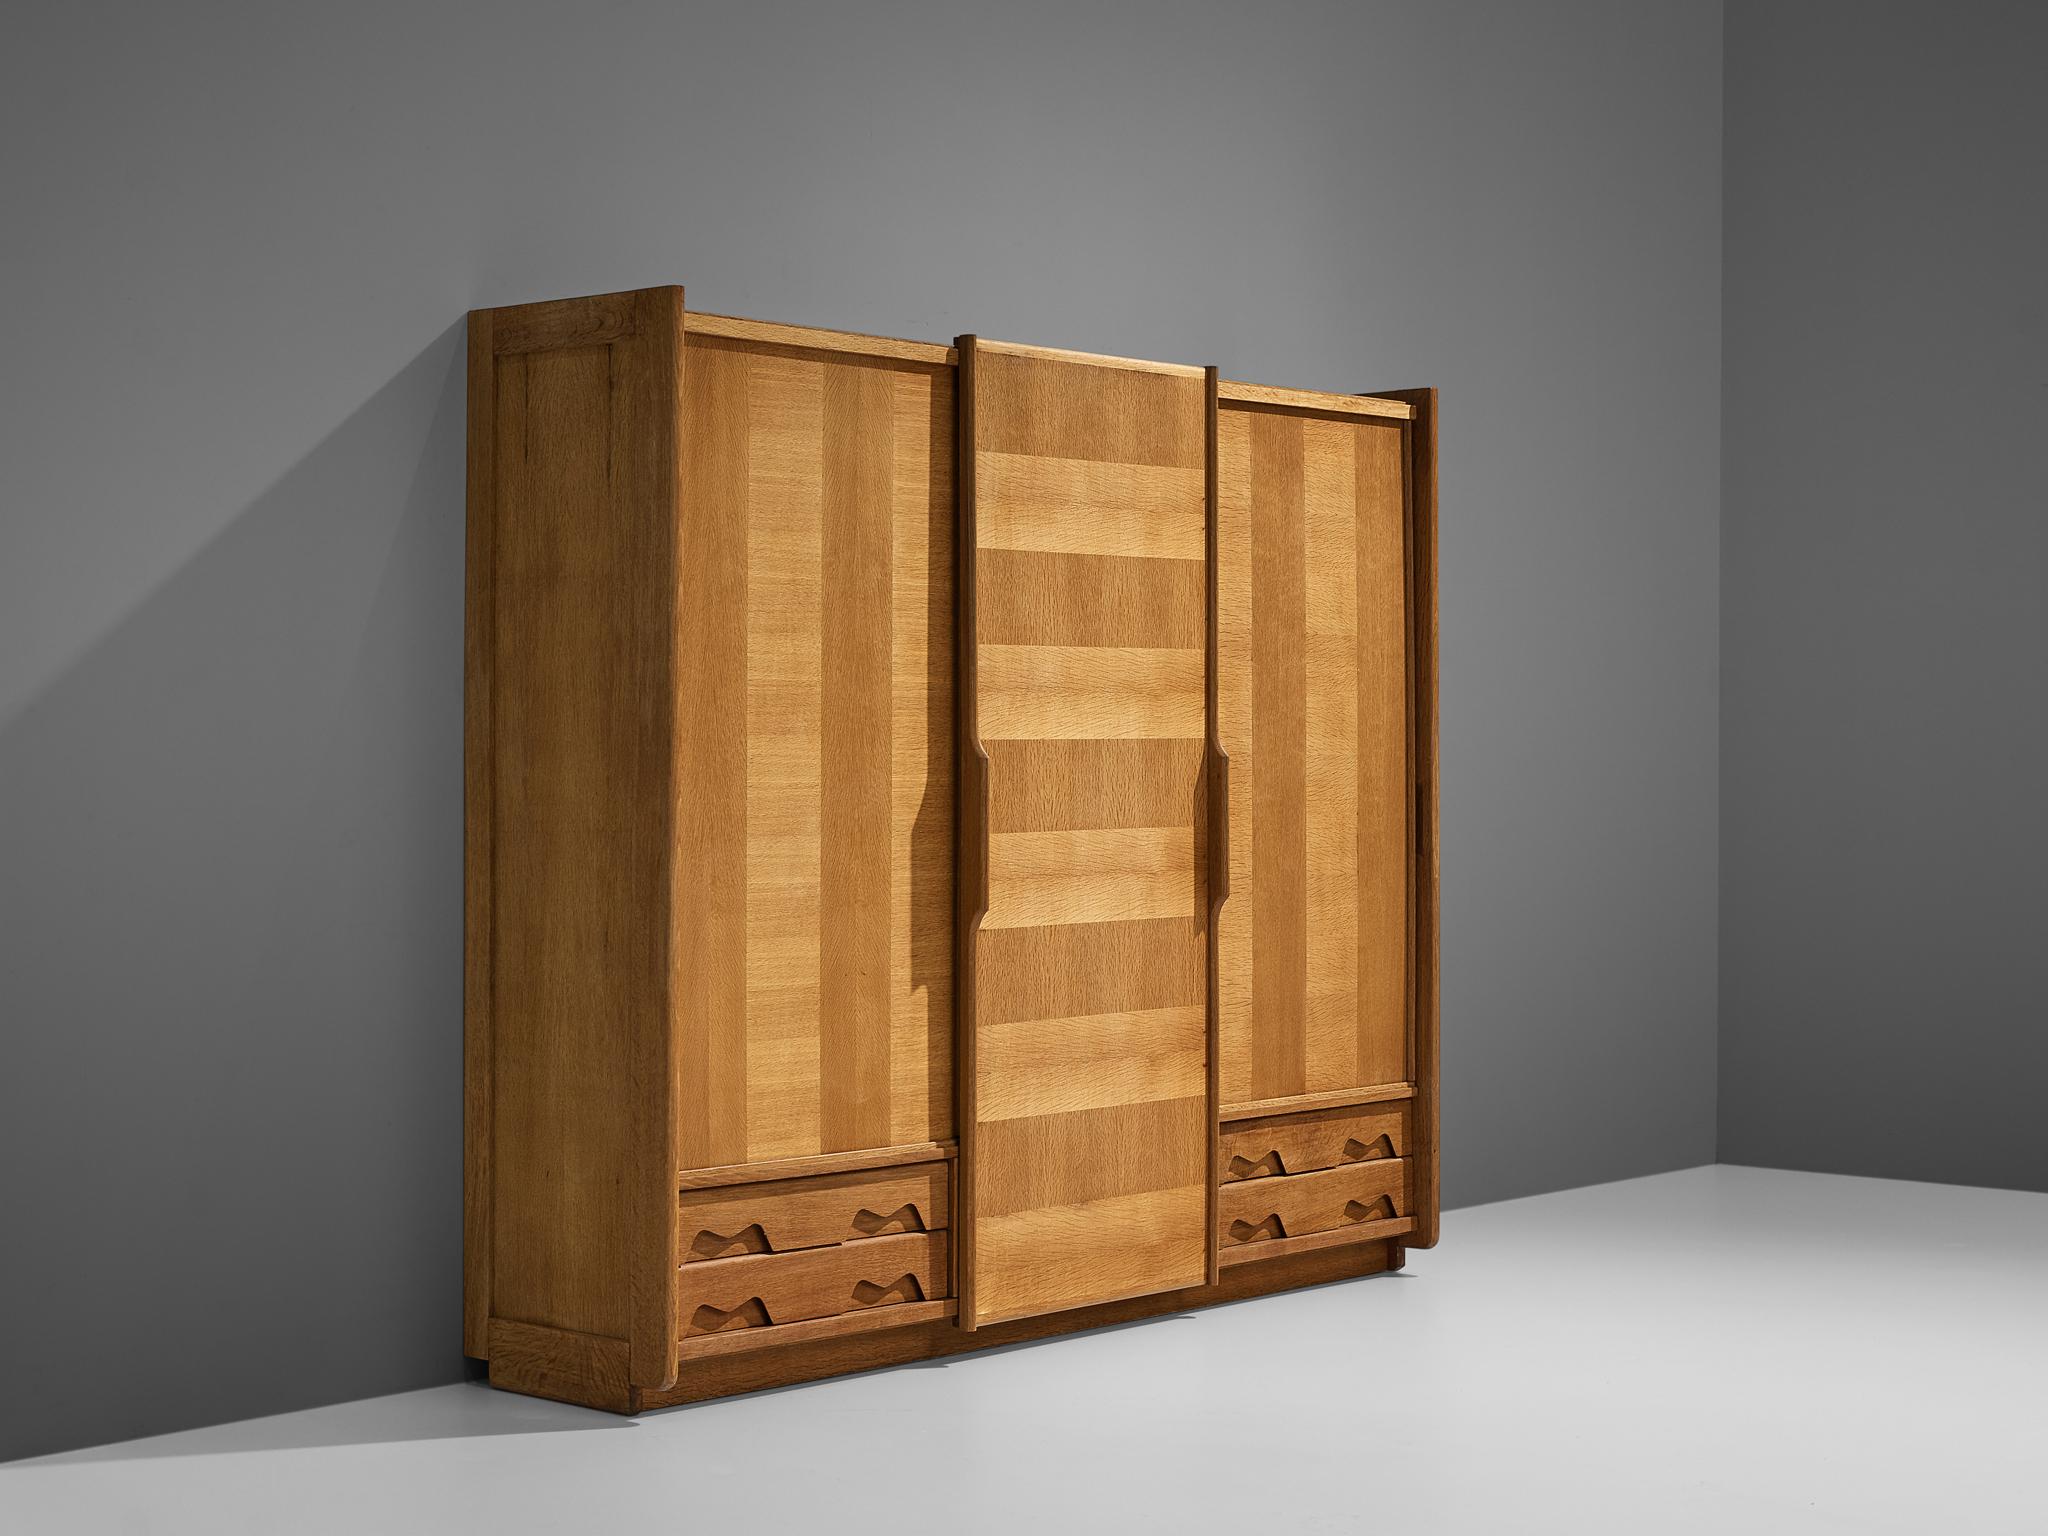 Guillerme et Chambron, wardrobe, oak, France, 1960s.

Three sliding doors structure this wardrobe designed by Guillerme et Chambron. Two doors are expanded with two bottom drawers which show decorative forms. The doors are visually structured by